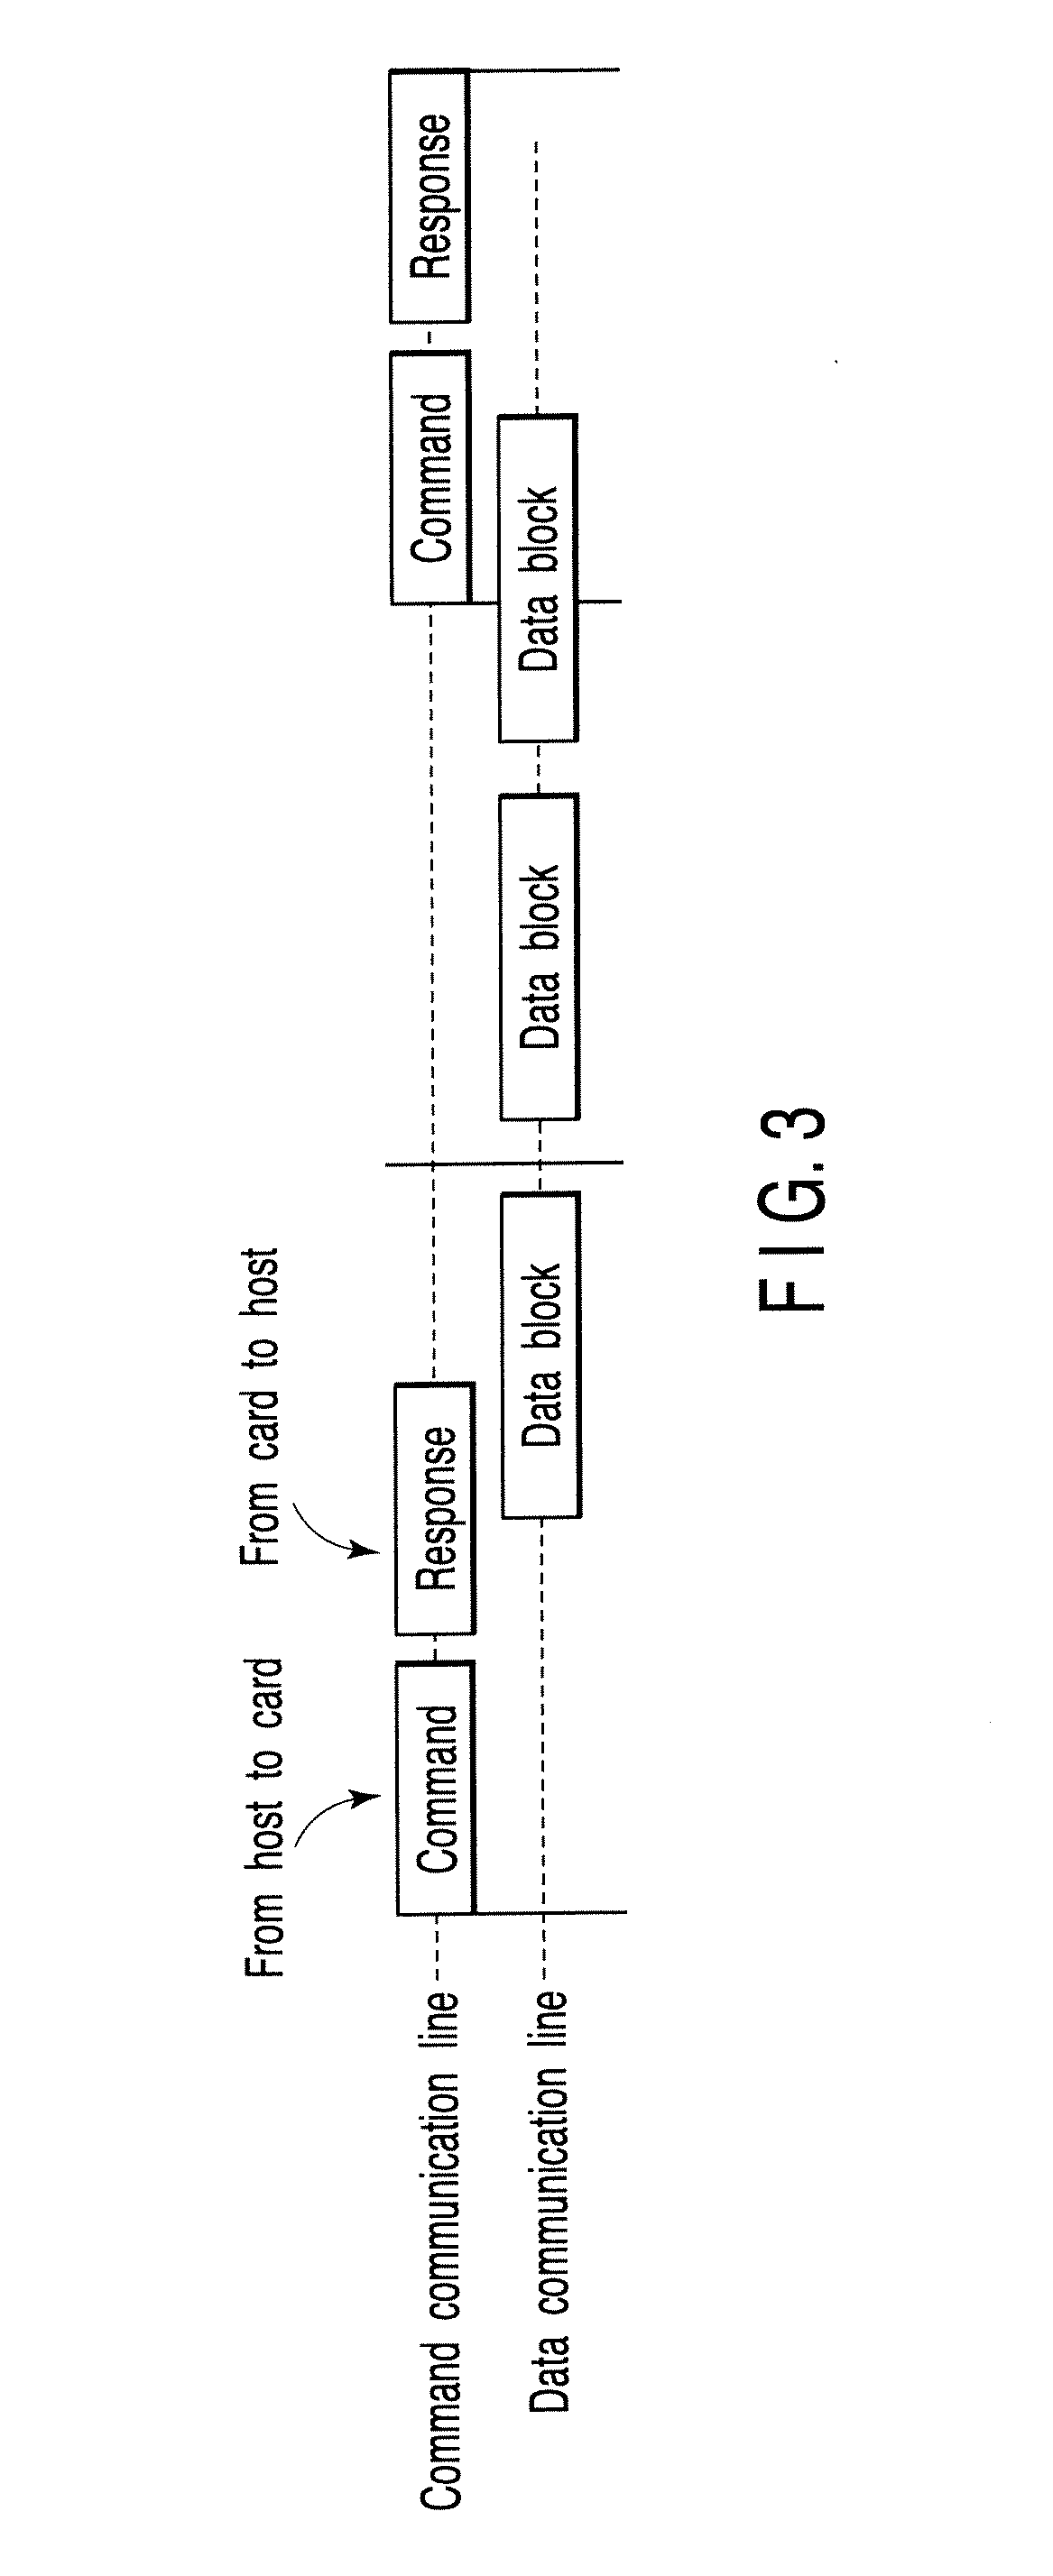 Method of controlling semiconductor memory card system